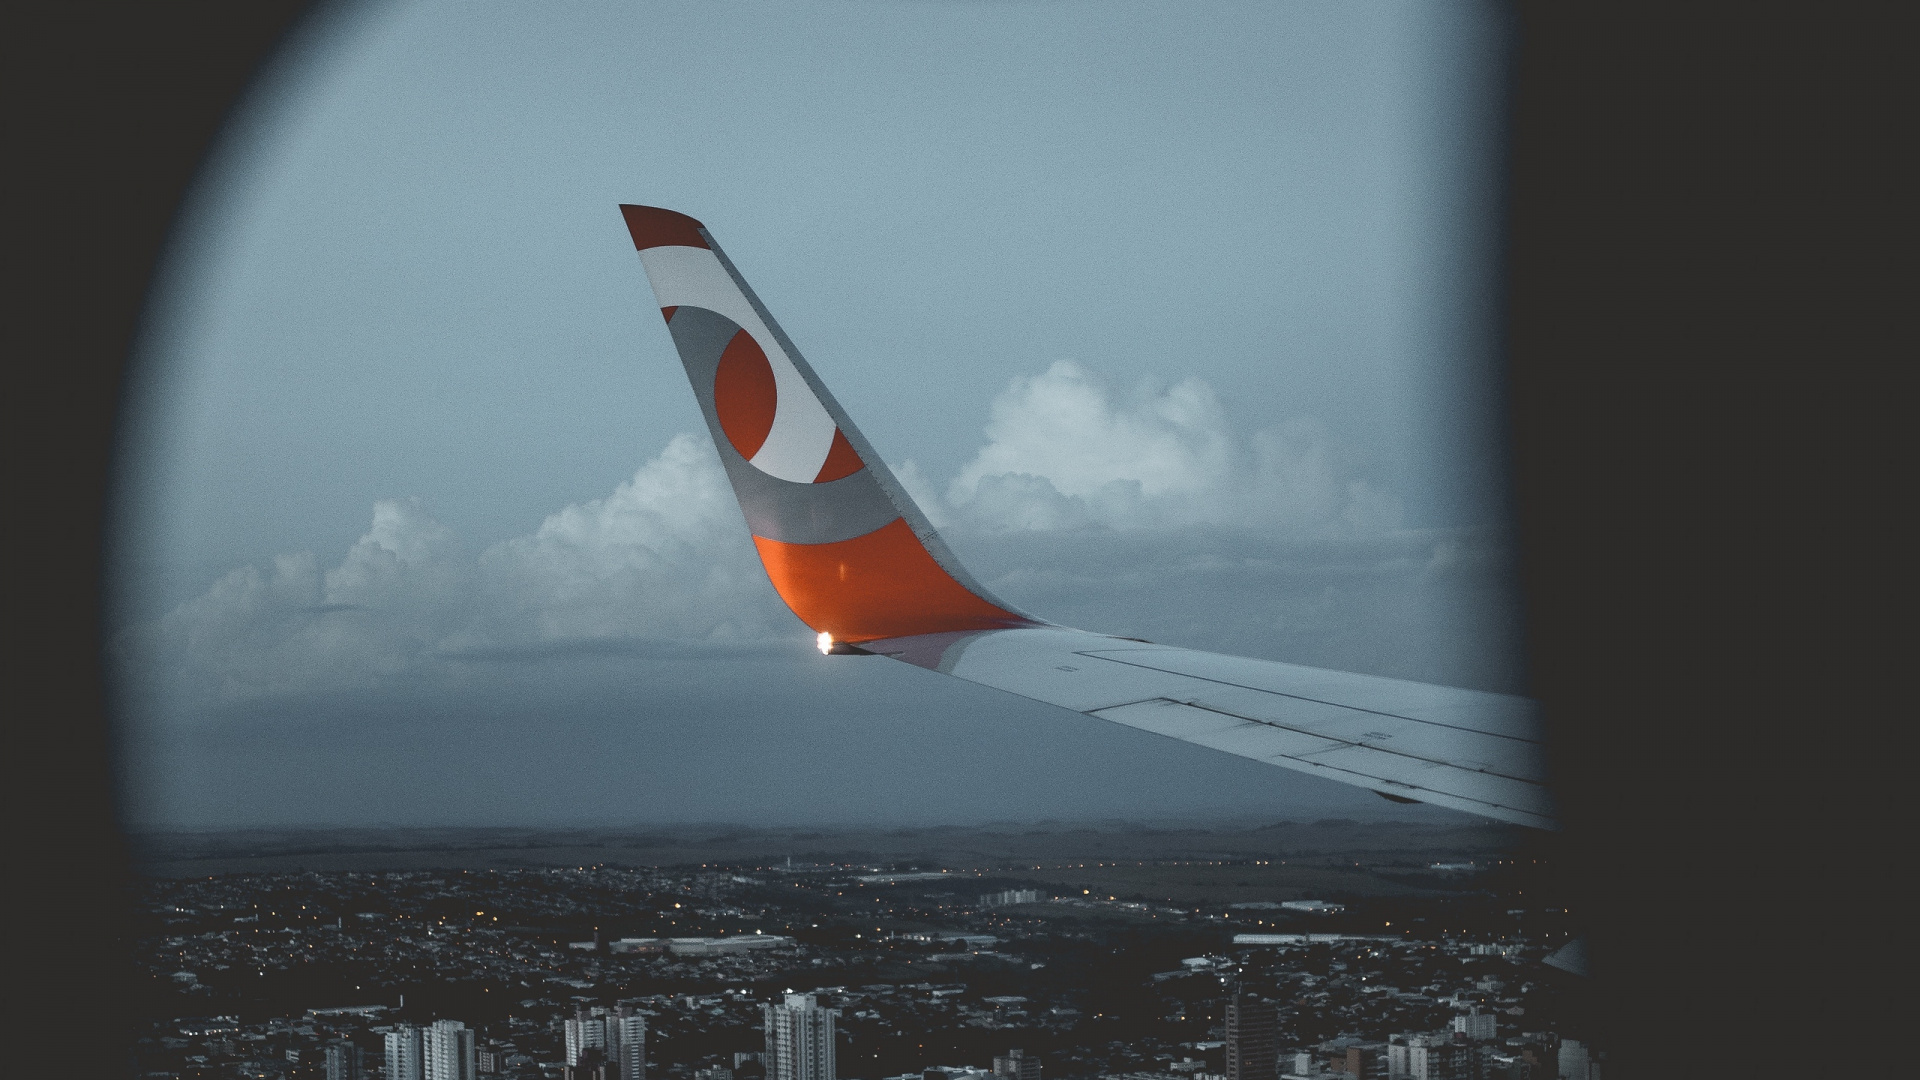 White and Orange Airplane Wing During Daytime. Wallpaper in 1920x1080 Resolution